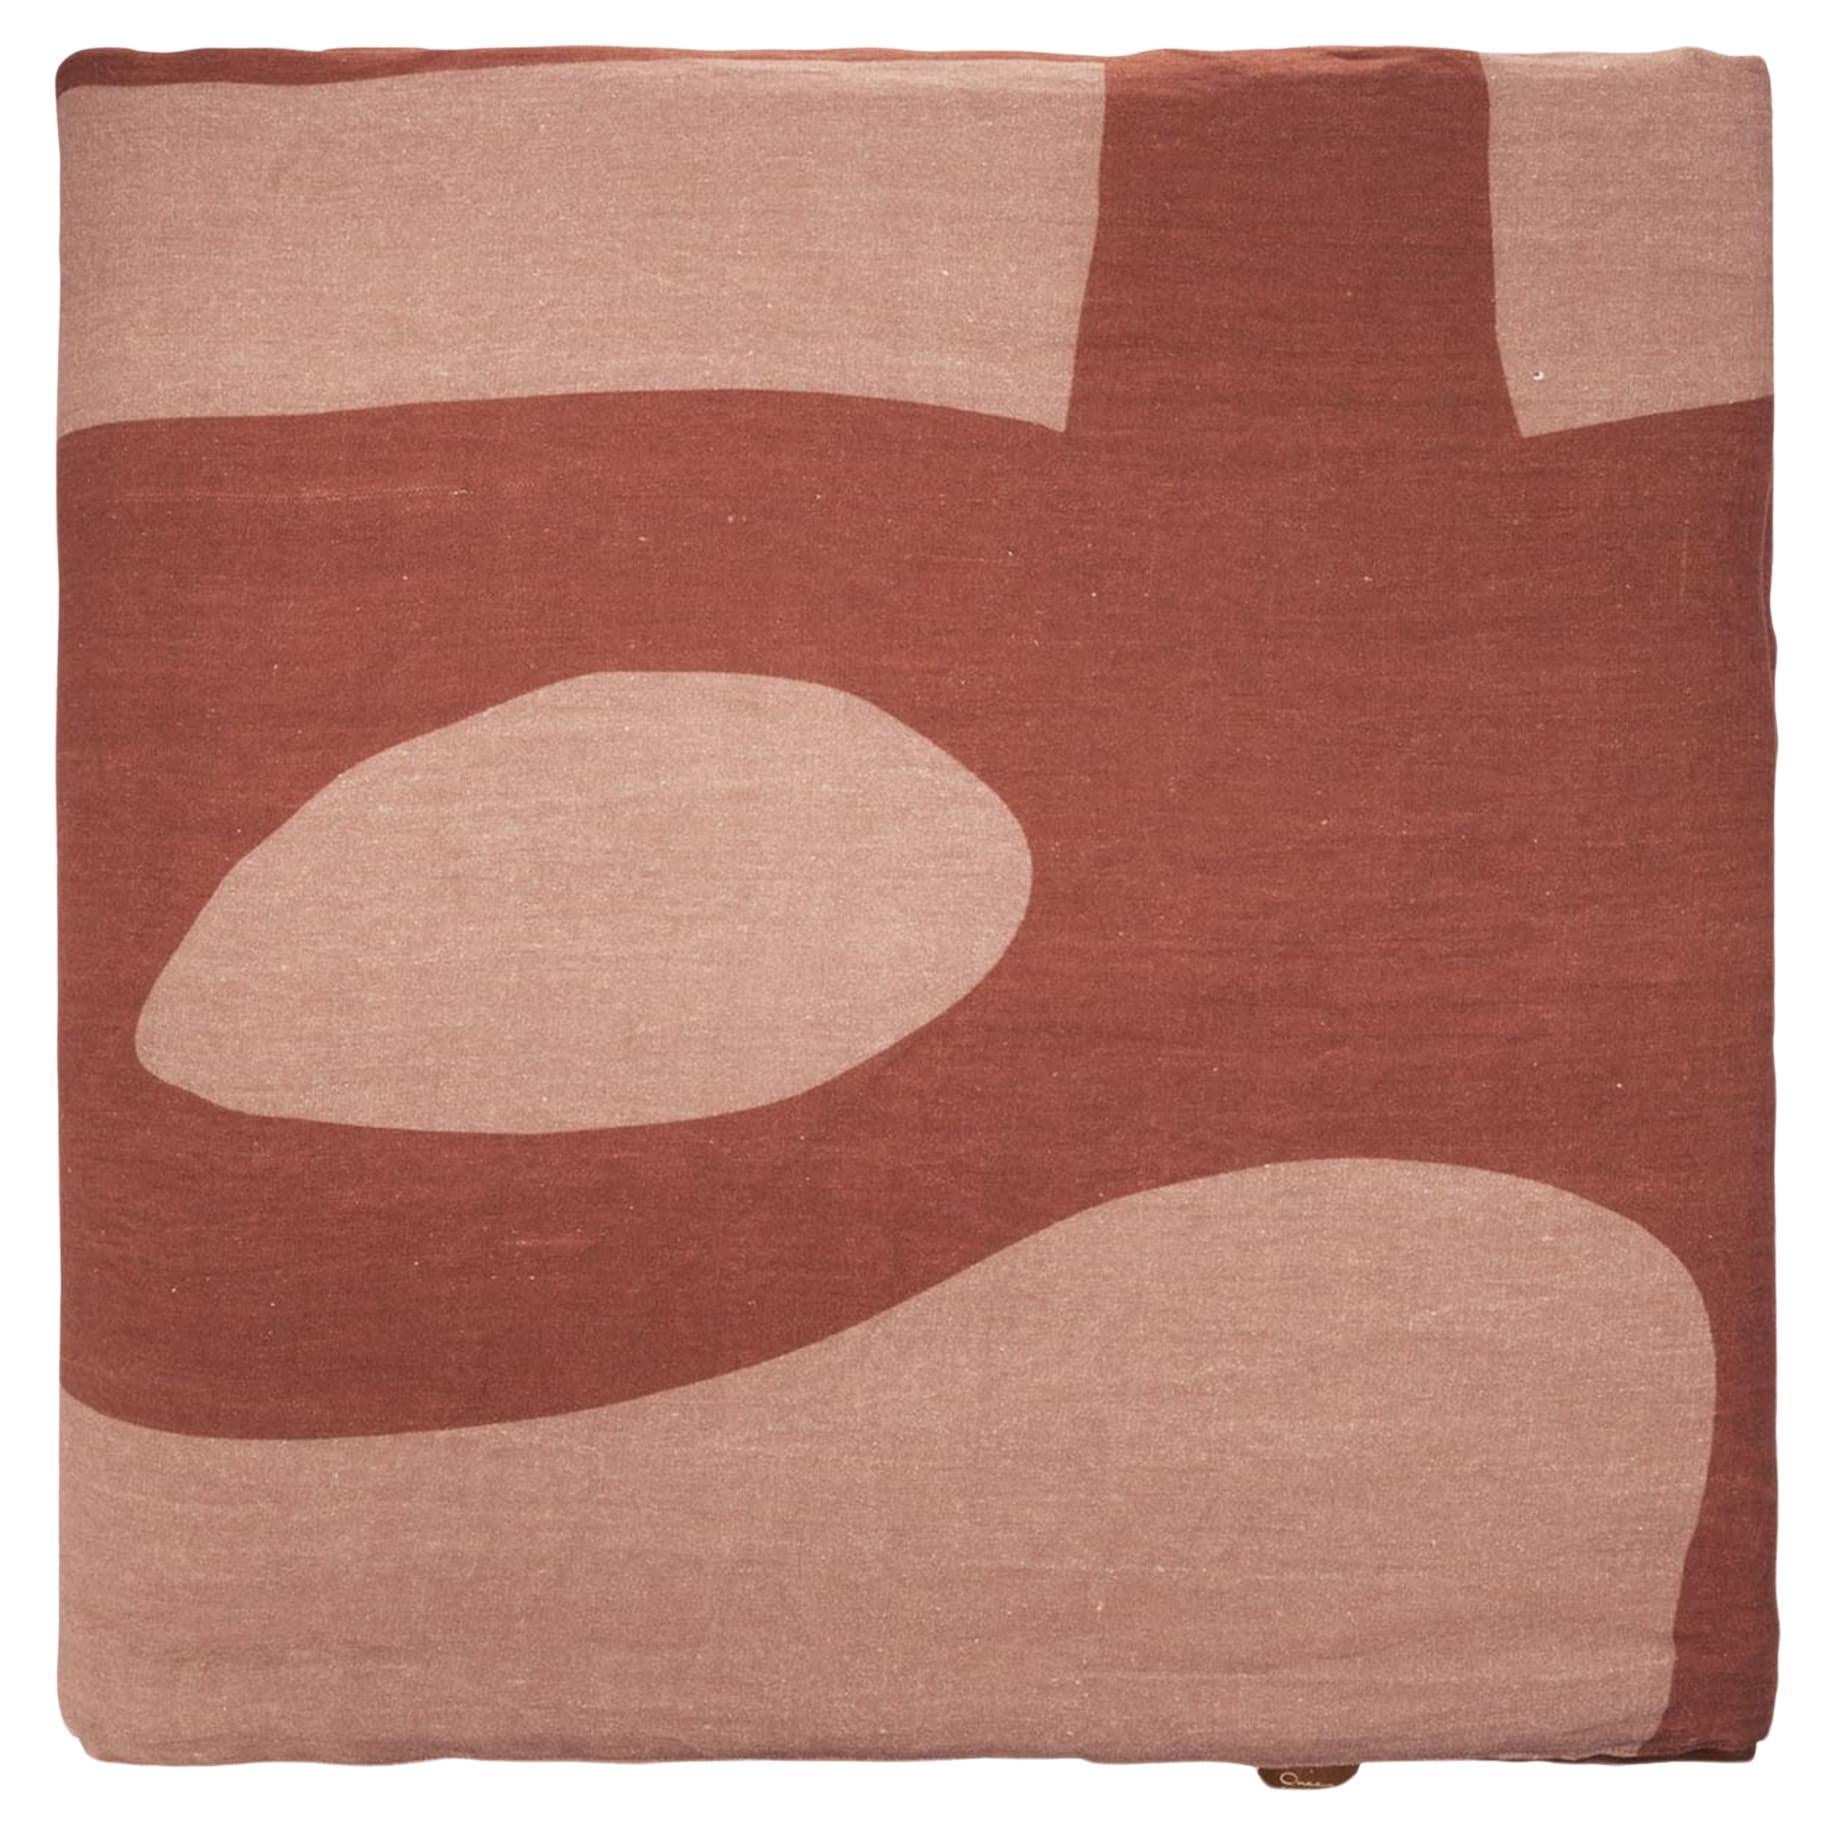 Sibylle#4 Vintage Pink/Bordeaux Printed Throw by Studiopepe For Sale